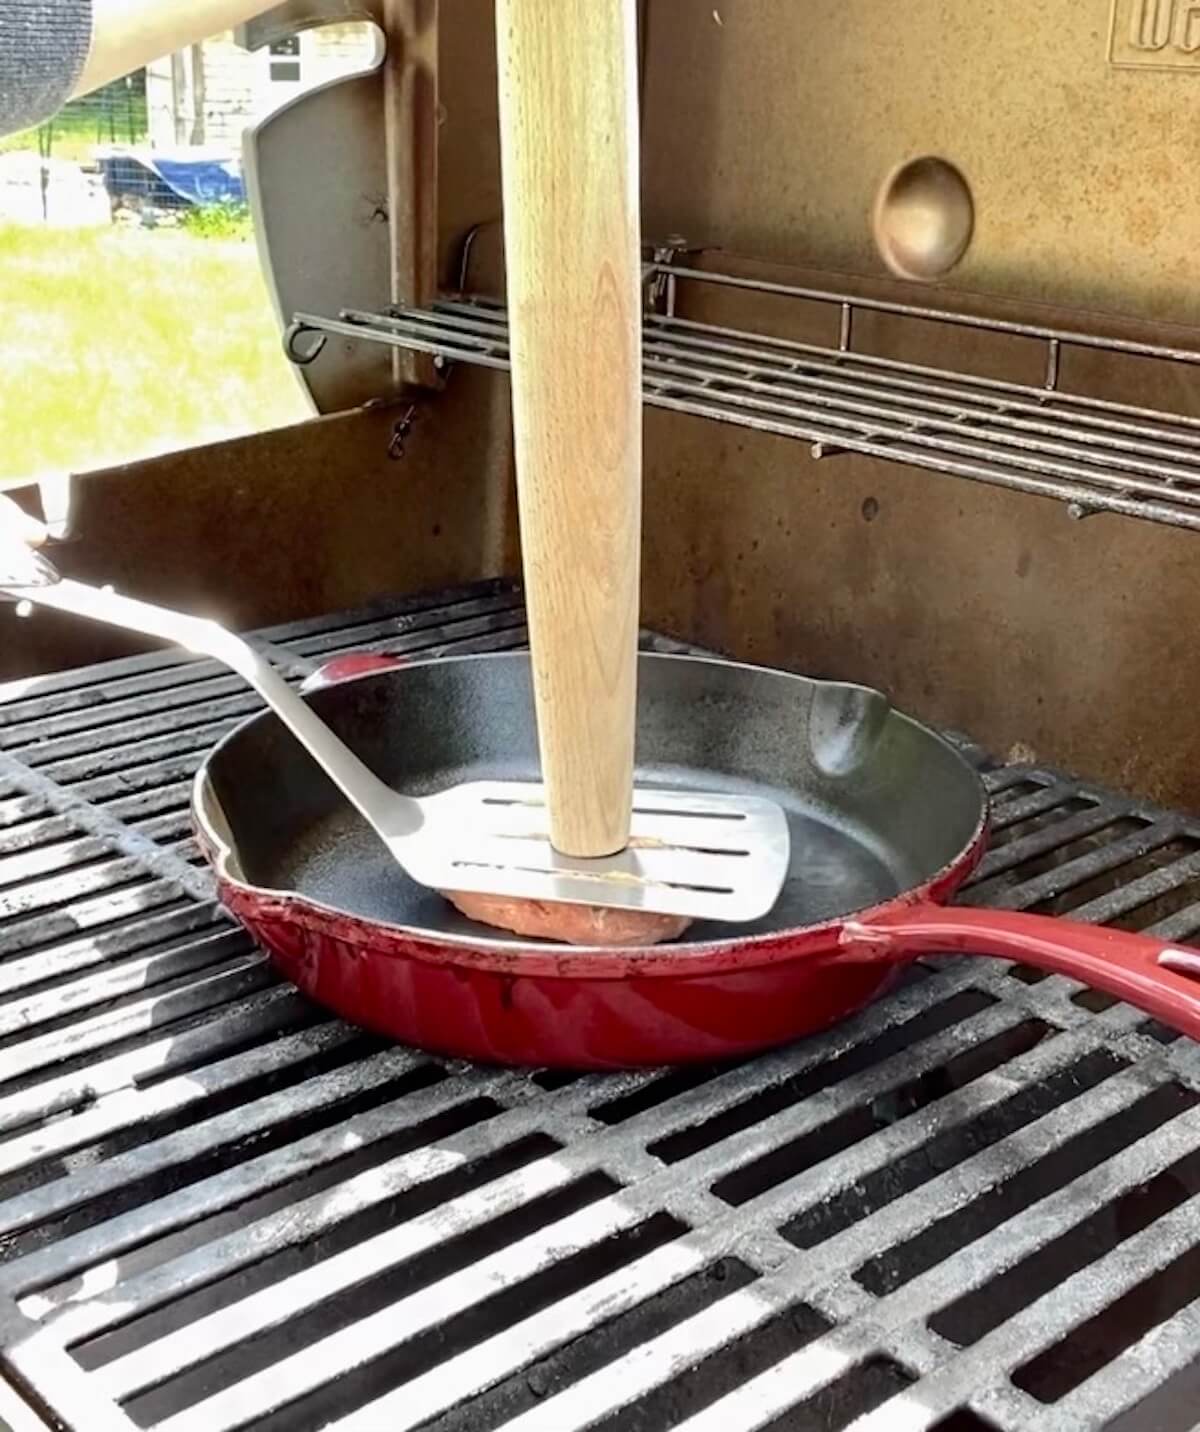 A turkey burger being smashed into a cast iron skillet on the grill using a spatula and wooden rolling pin.